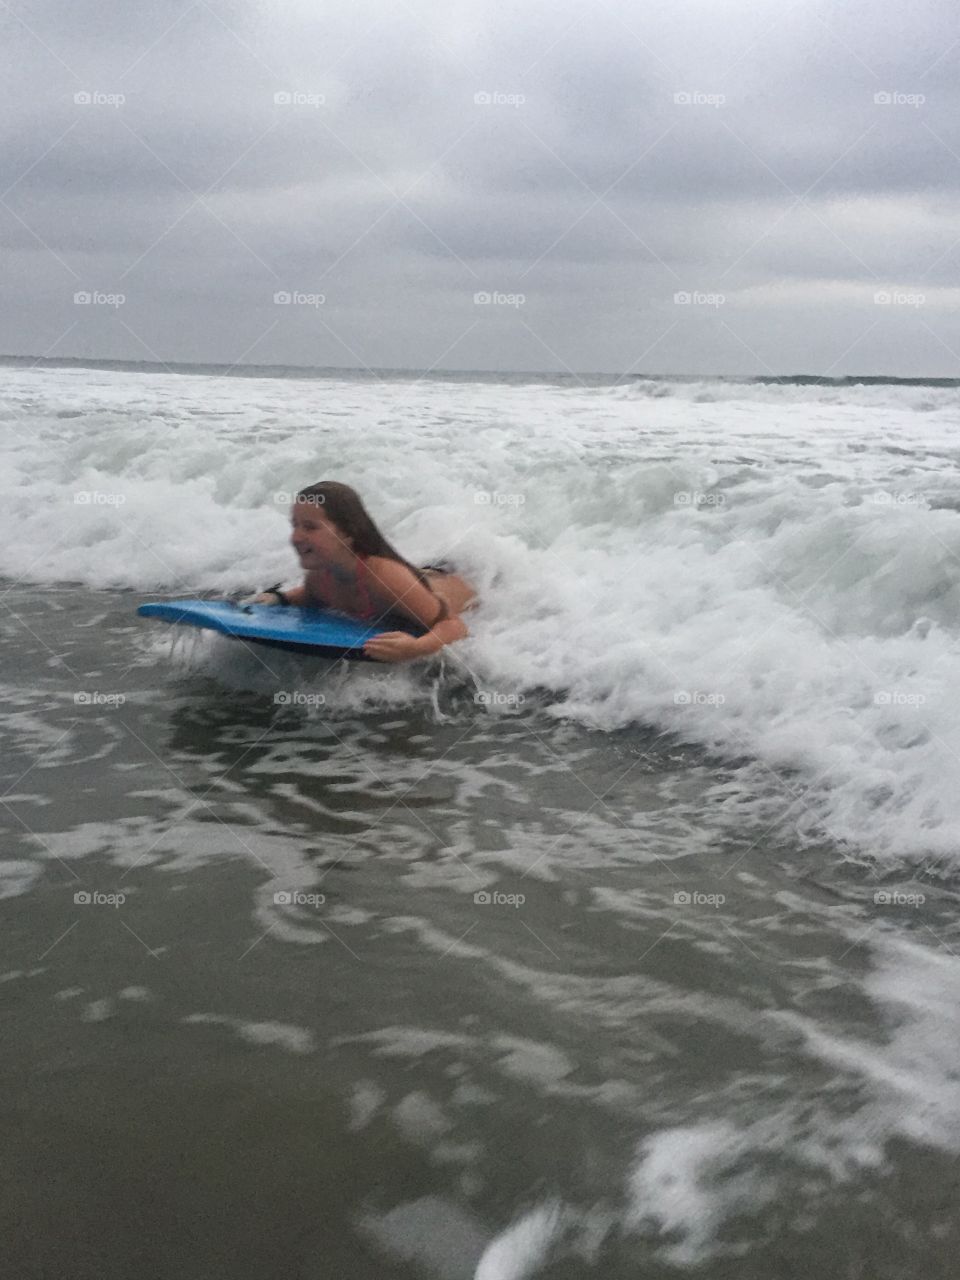 Boogie boarding the Carlsbad waves!